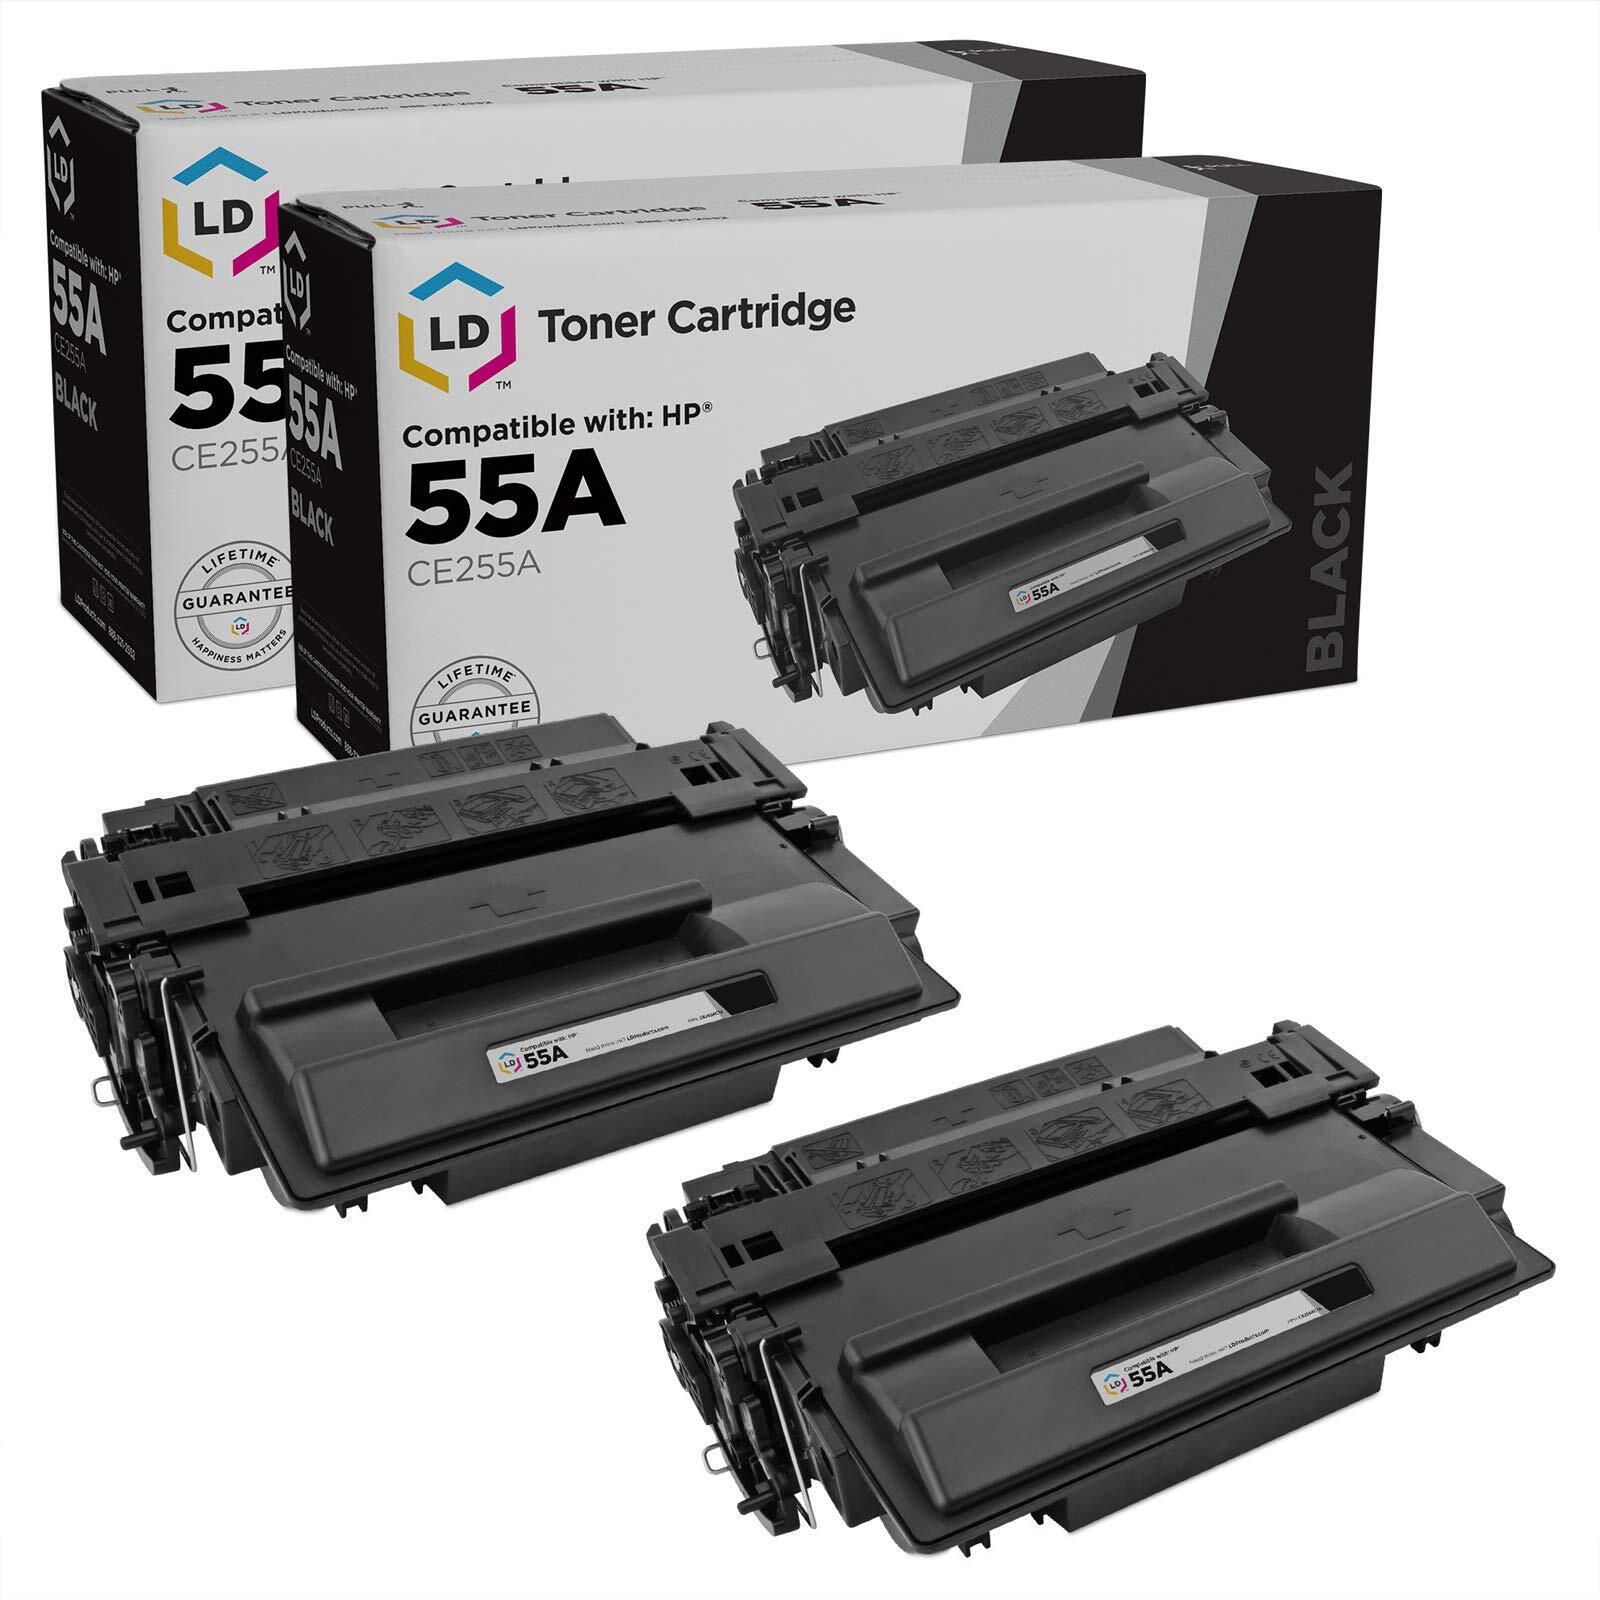 LD Products Replacements for HP 55A 55 CE255A CE255 Toner Cartridge (2PK)